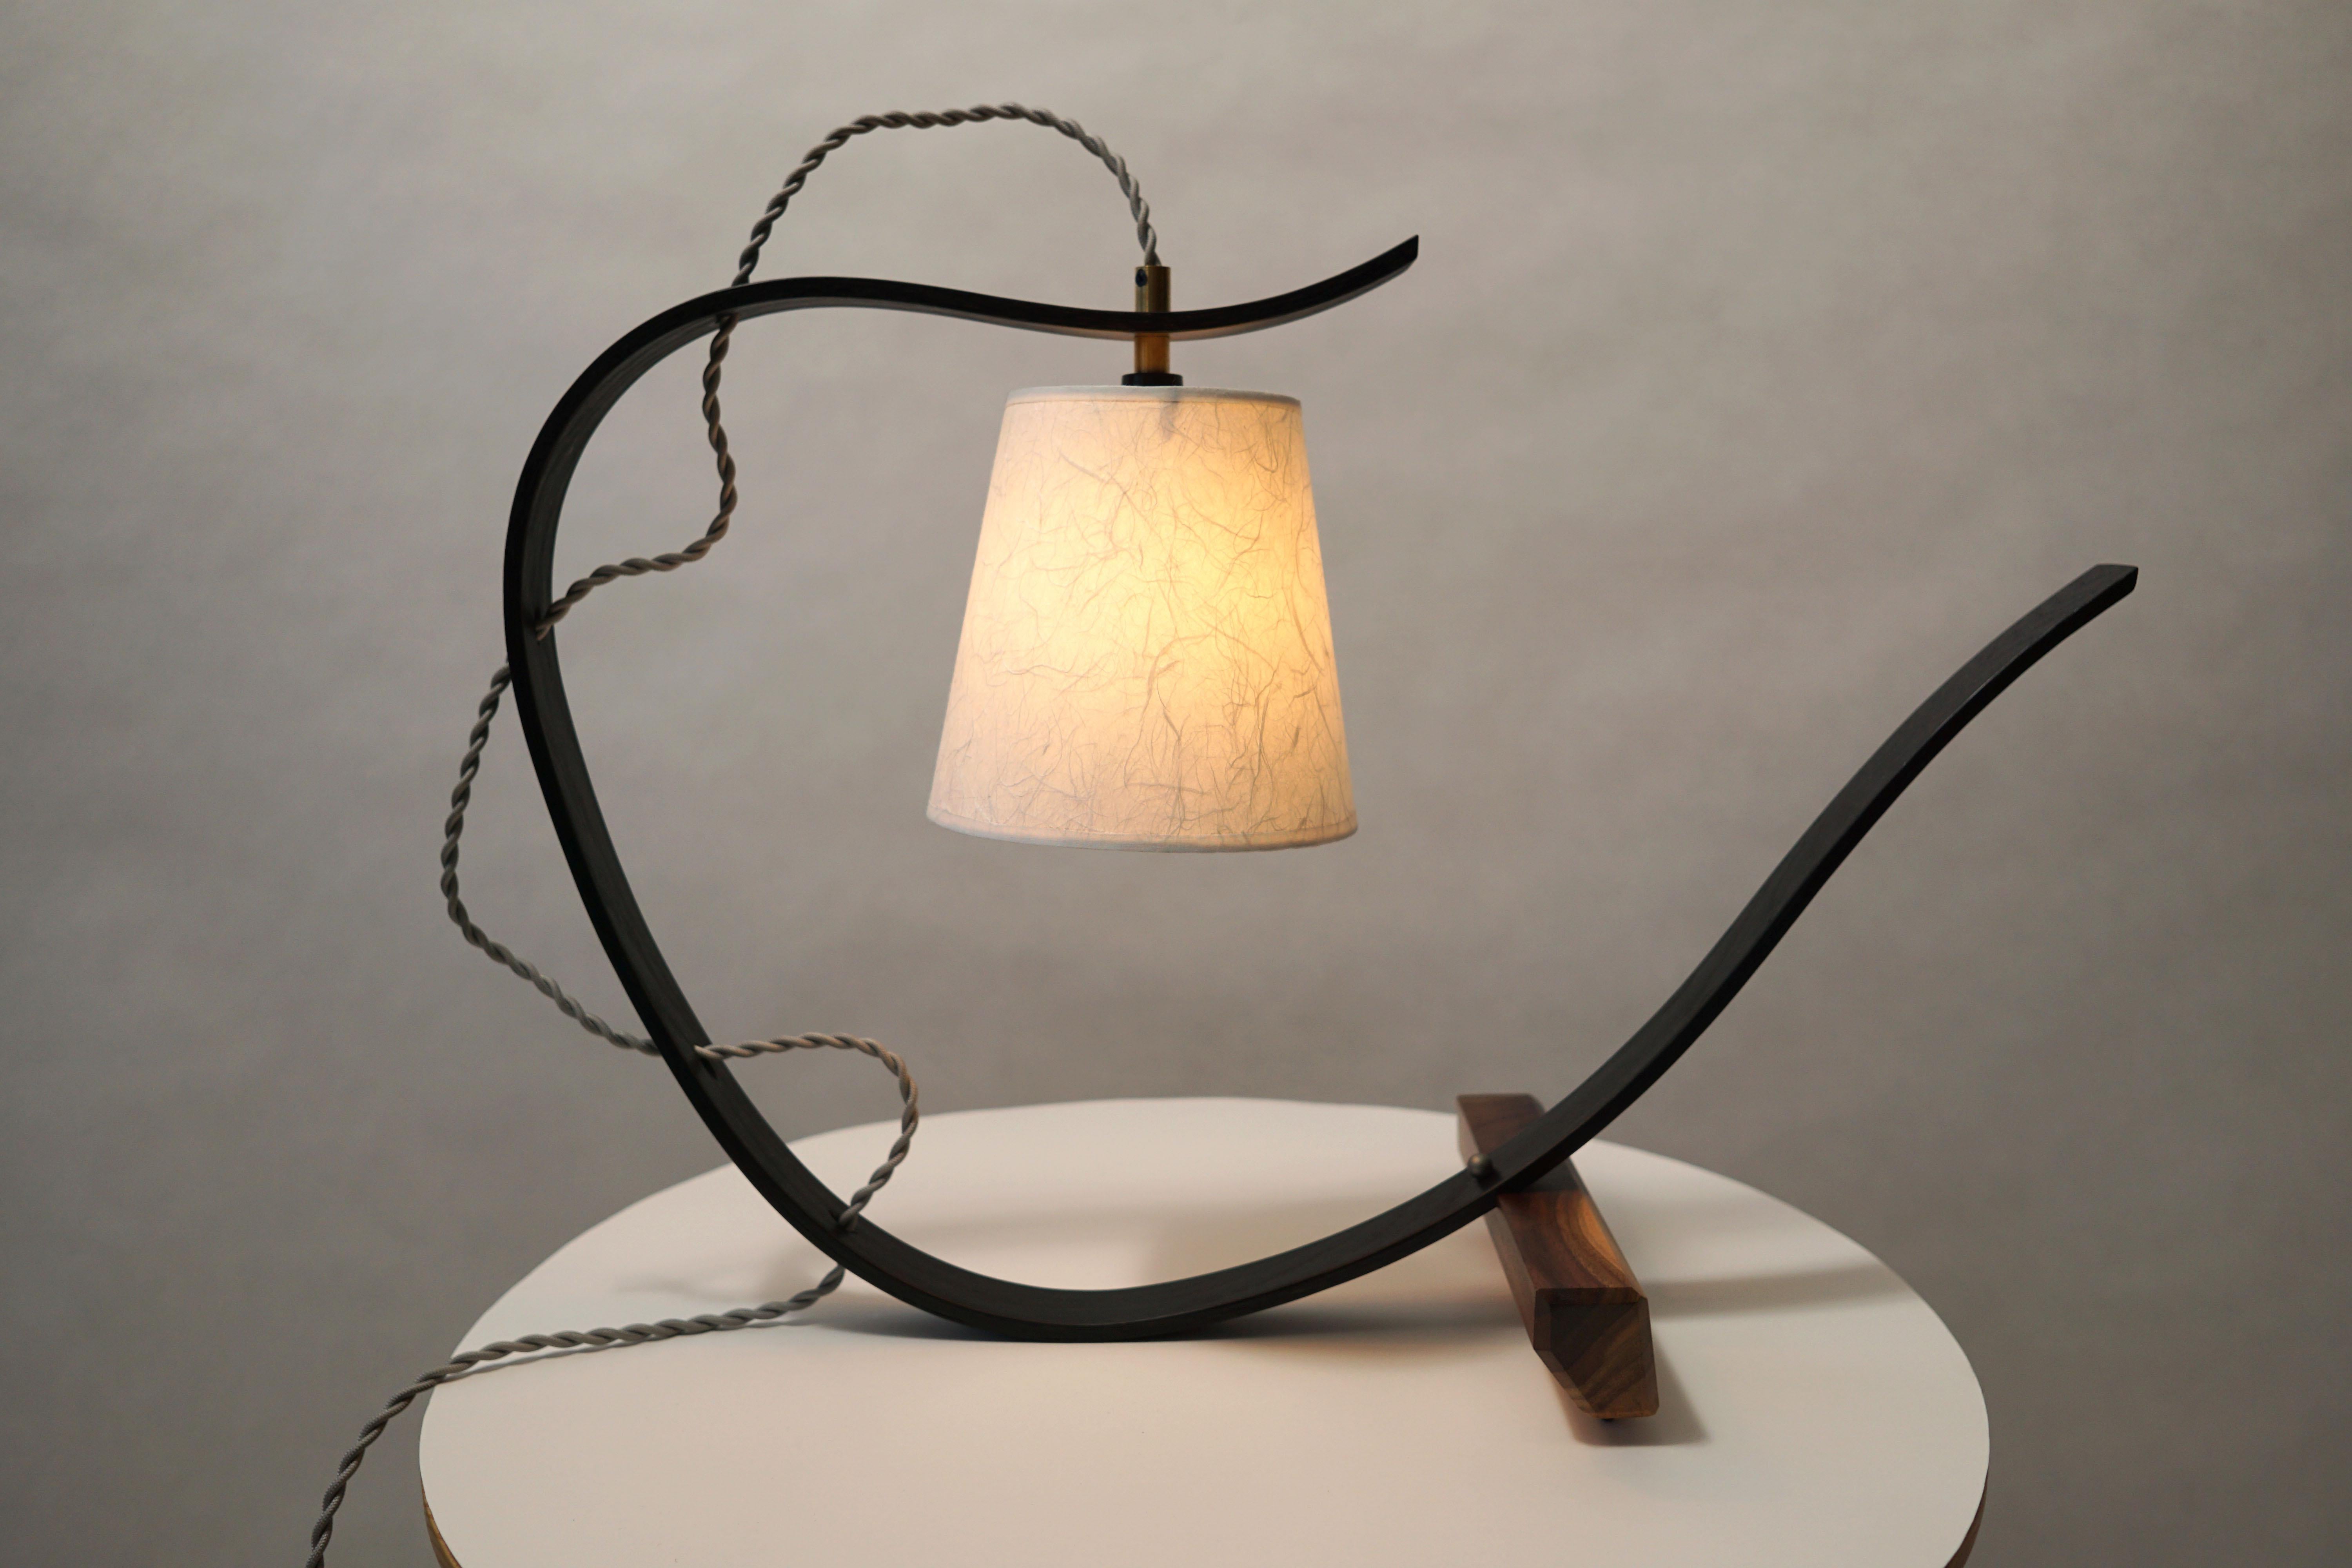 A table lamp that is also a sculpture will draw attention to a corner in your living room. It will bring new life to your dining room while setting a cozy mood. The light ash wood has interesting, bold grain. The base is a beautiful piece of dark